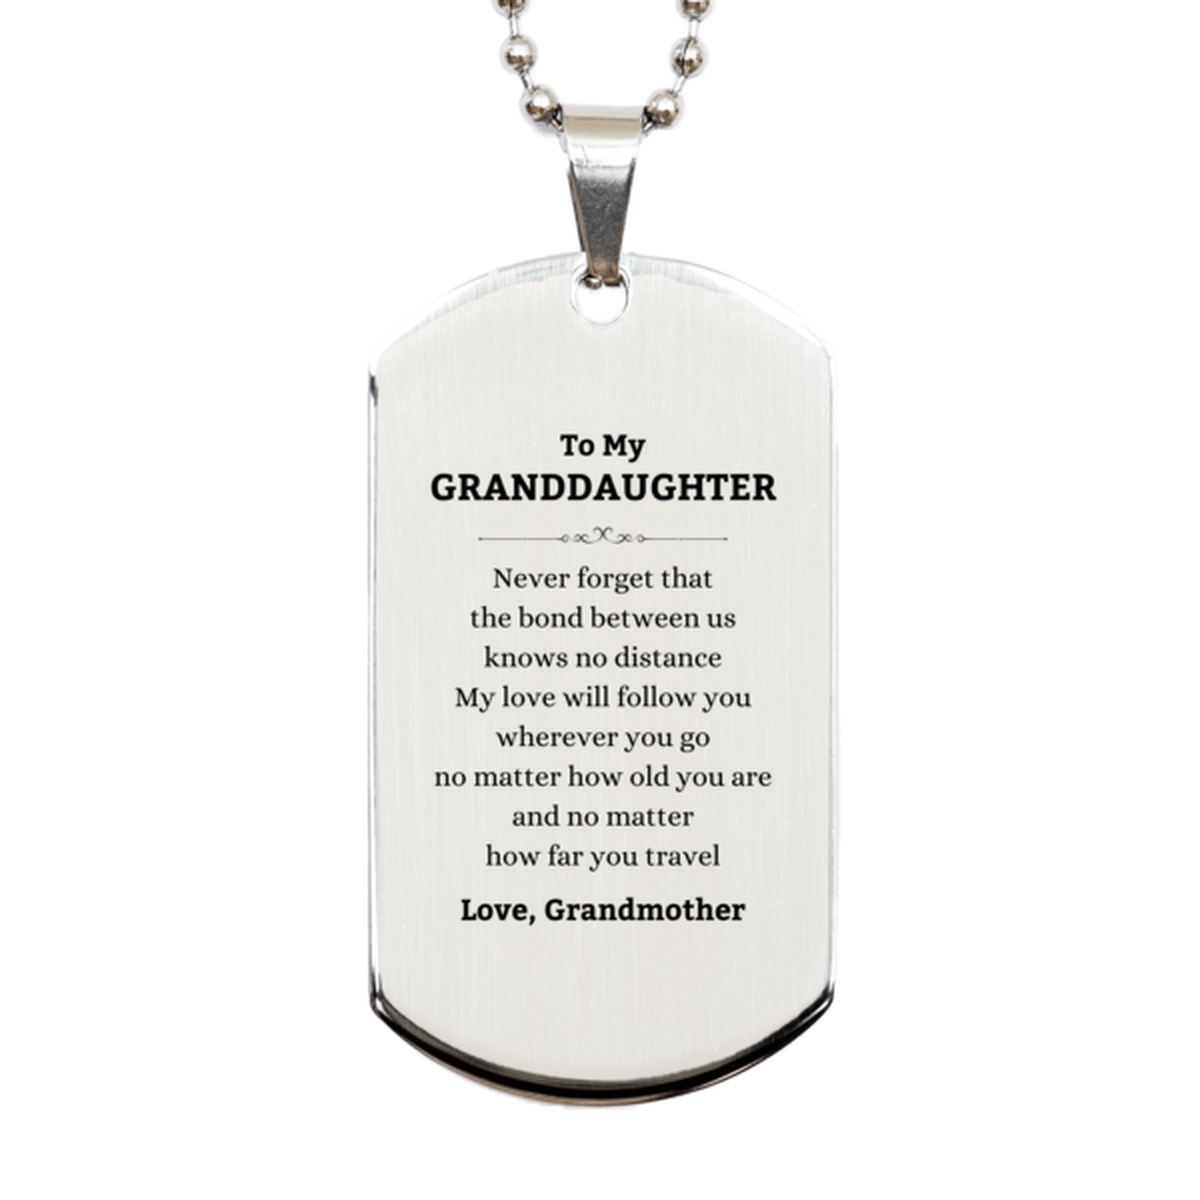 Granddaughter Birthday Gifts from Grandmother, Adjustable Silver Dog Tag for Granddaughter Christmas Graduation Unique Gifts Granddaughter Never forget that the bond between us knows no distance. Love, Grandmother